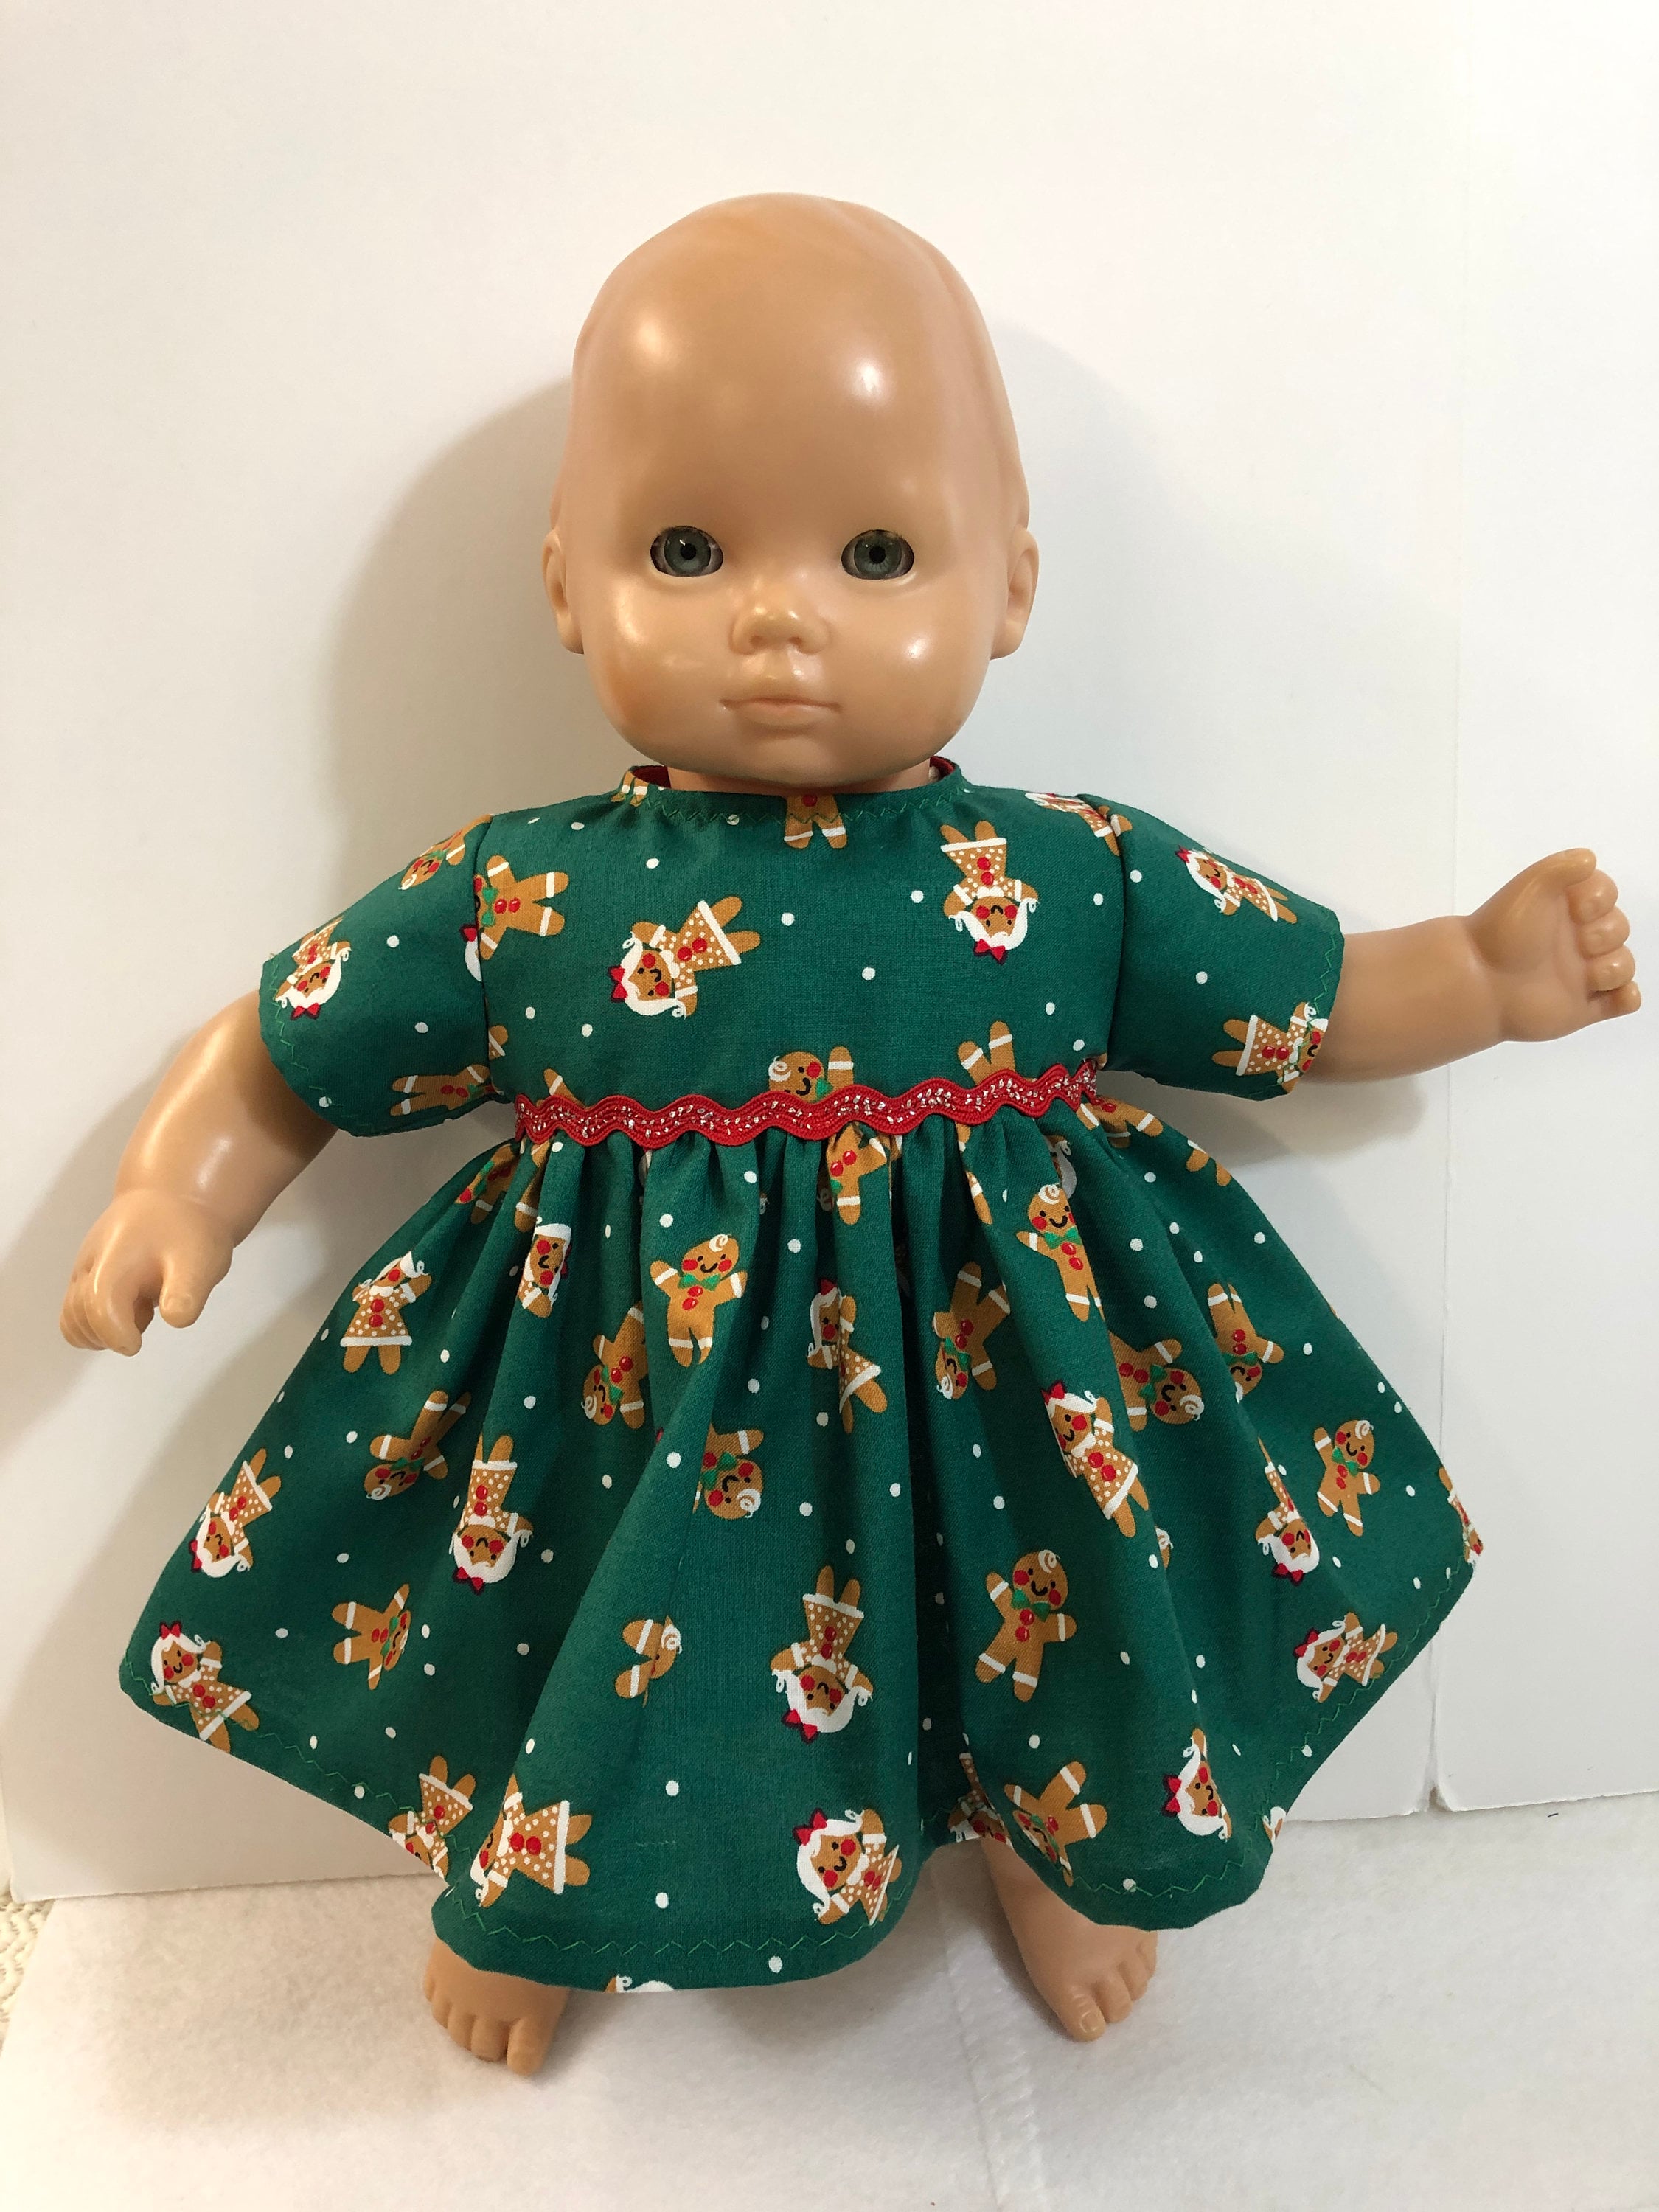 Holiday Outfit for 15 inch Doll such as Bitty Baby Gingerbread Girls and Boys Embroidered T-Shirt with Corduroy Pants